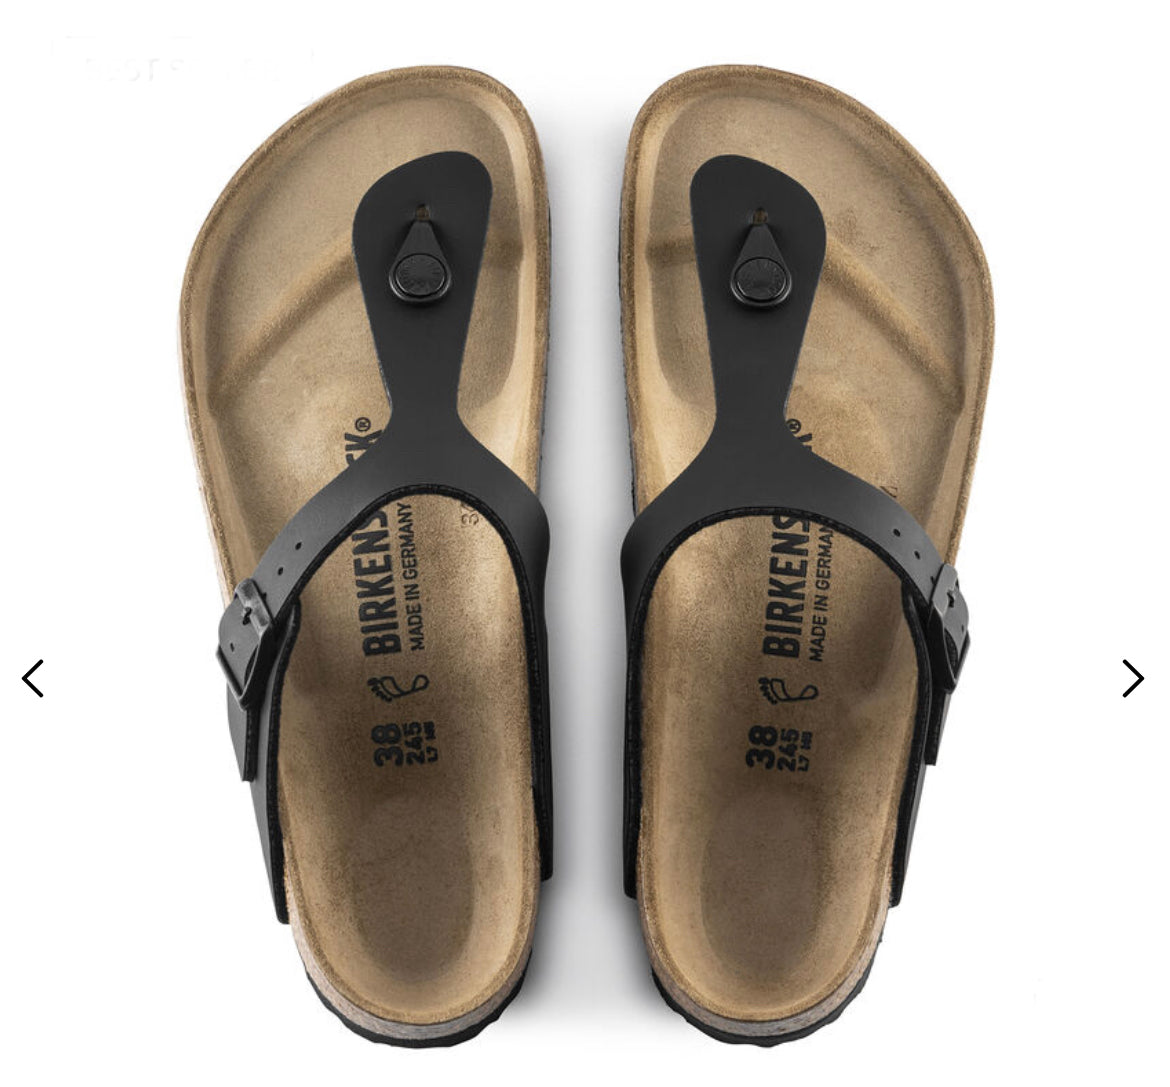 Birkenstock Gizeh Black Woman’s Sandal - All Mixed Up 